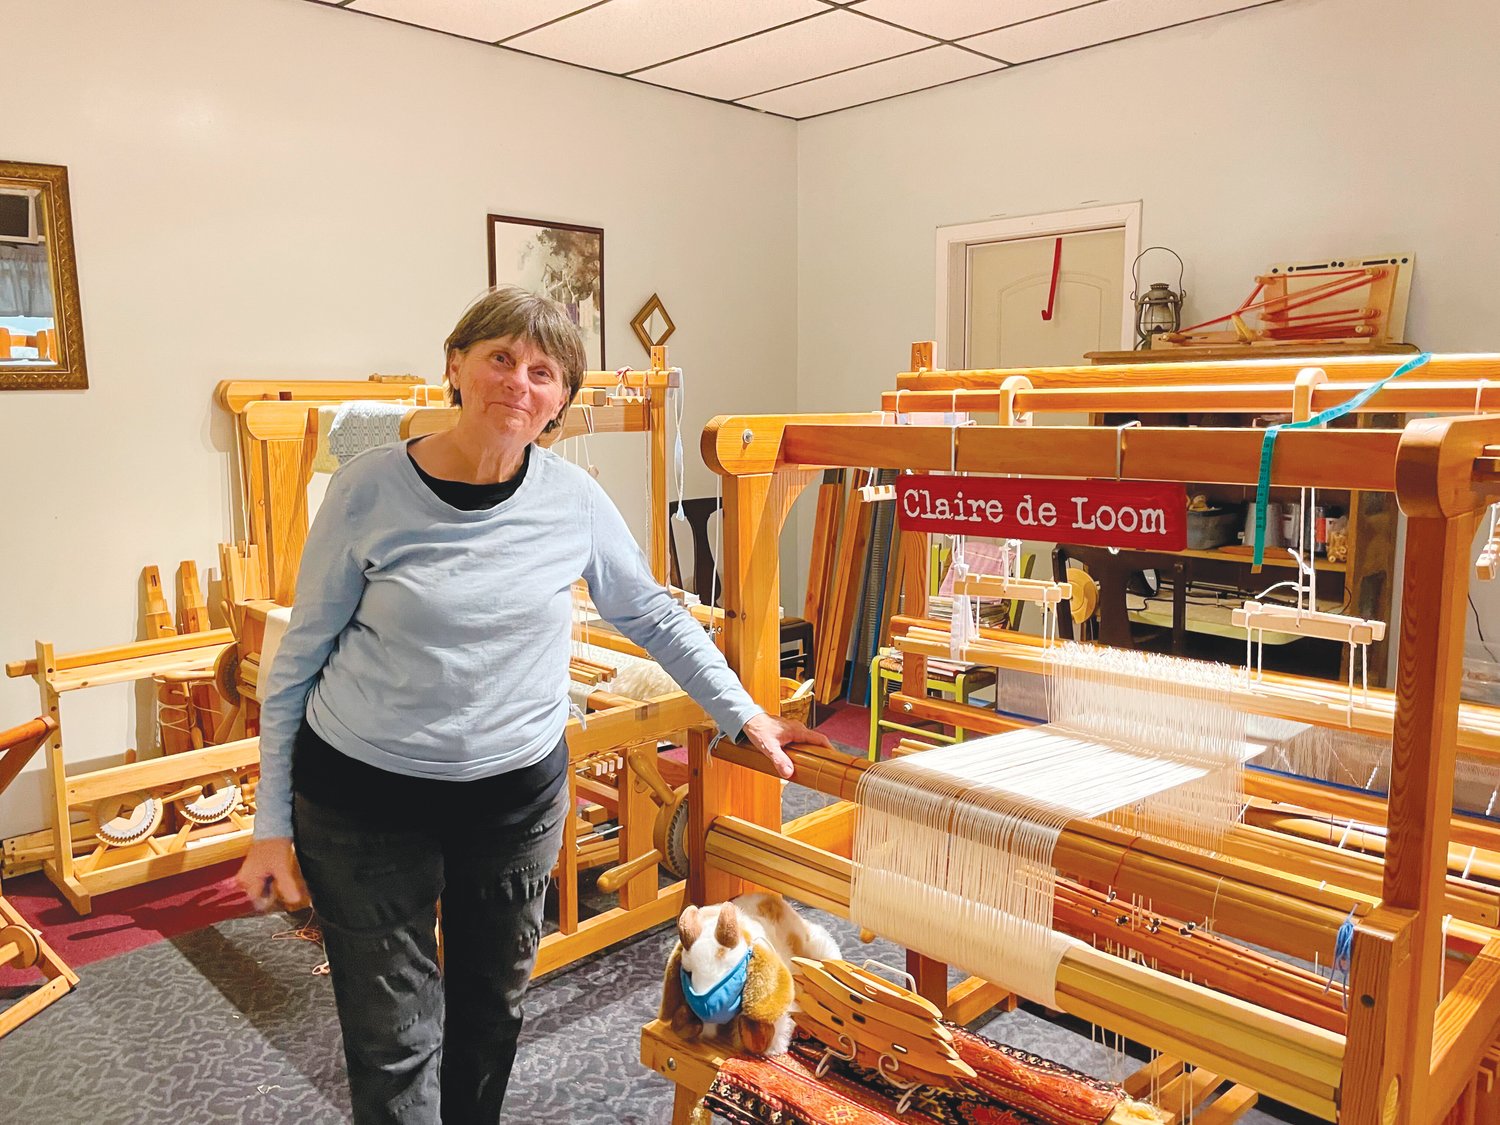 Twin Birch & Teasel co-owner Sue Szary stands next to a loom on Monday at her shop in Siler City. Szary runs the store alongside her husband, Rich.